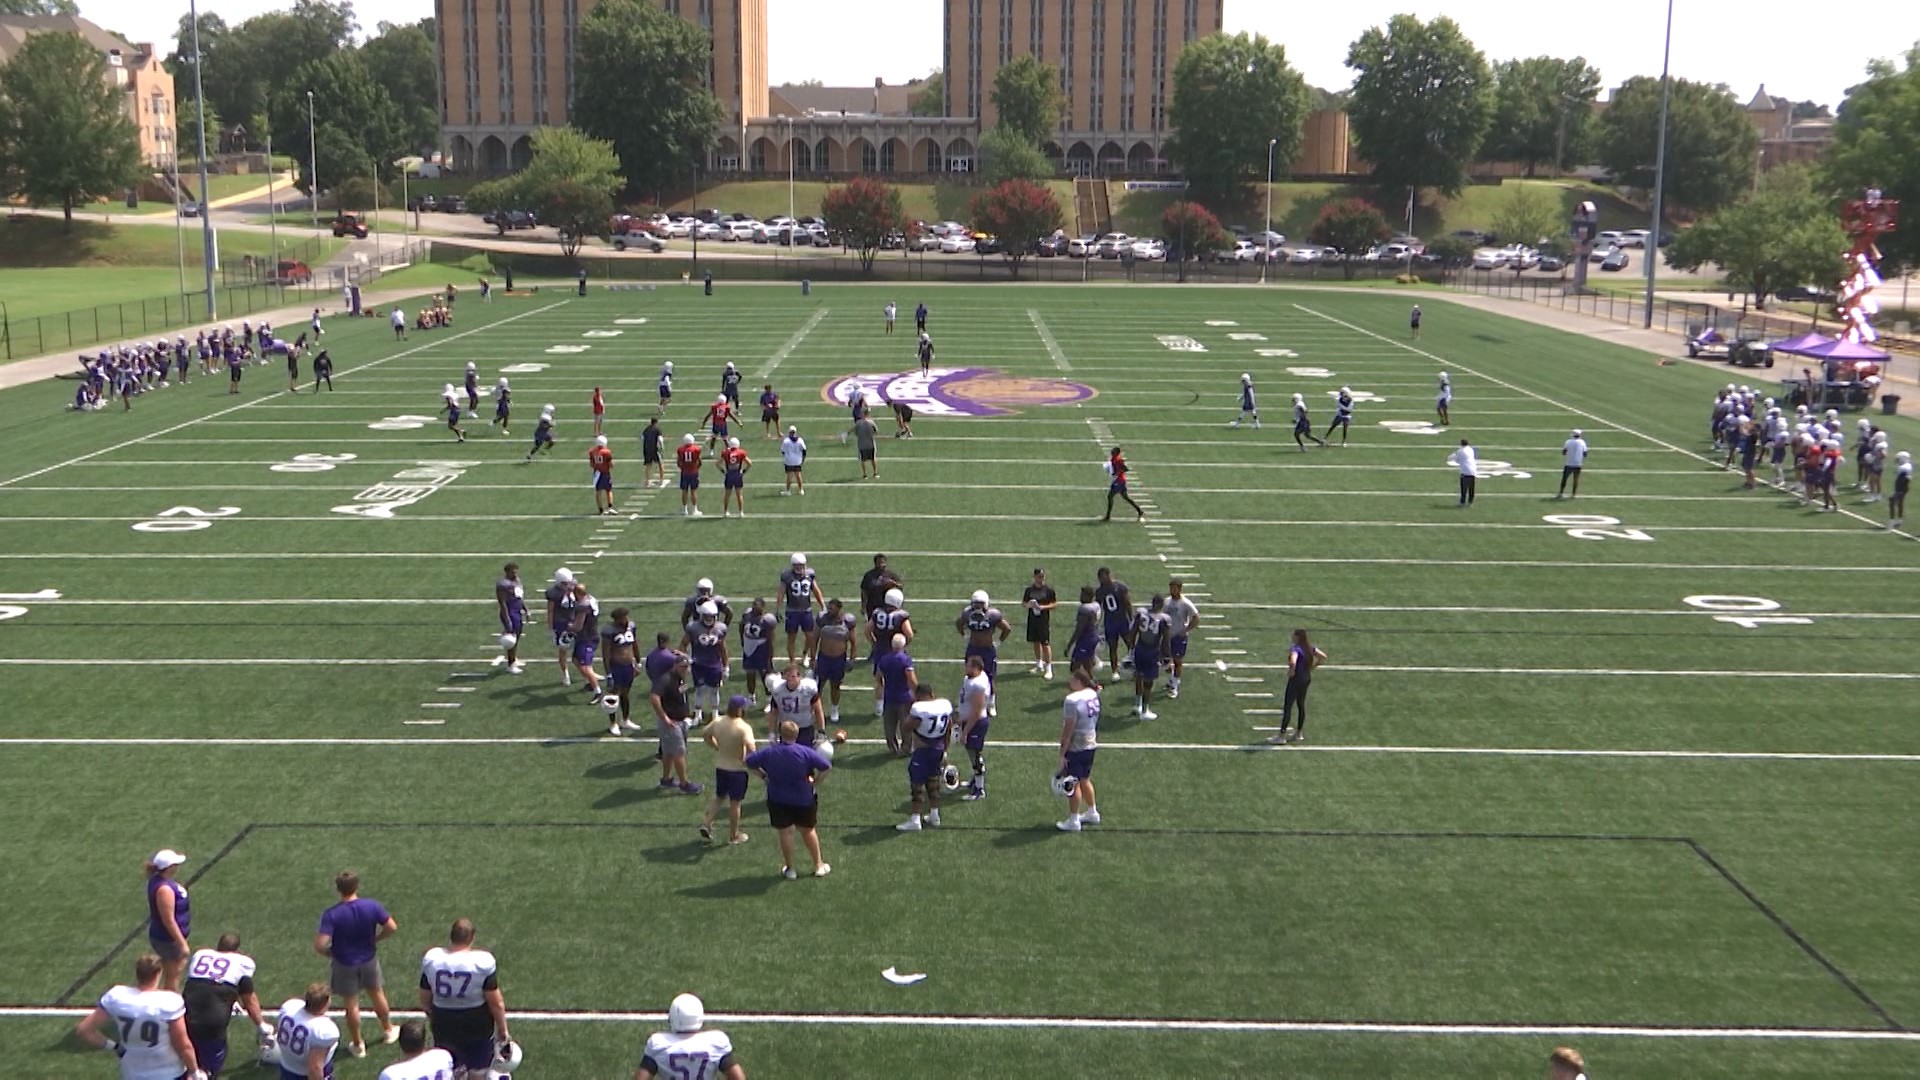 Coach Chris Willis & the UNA Lions continued fall camp with the addition of shells on Monday. Jonah Karp traveled to Florence to provide a recap from the hot session